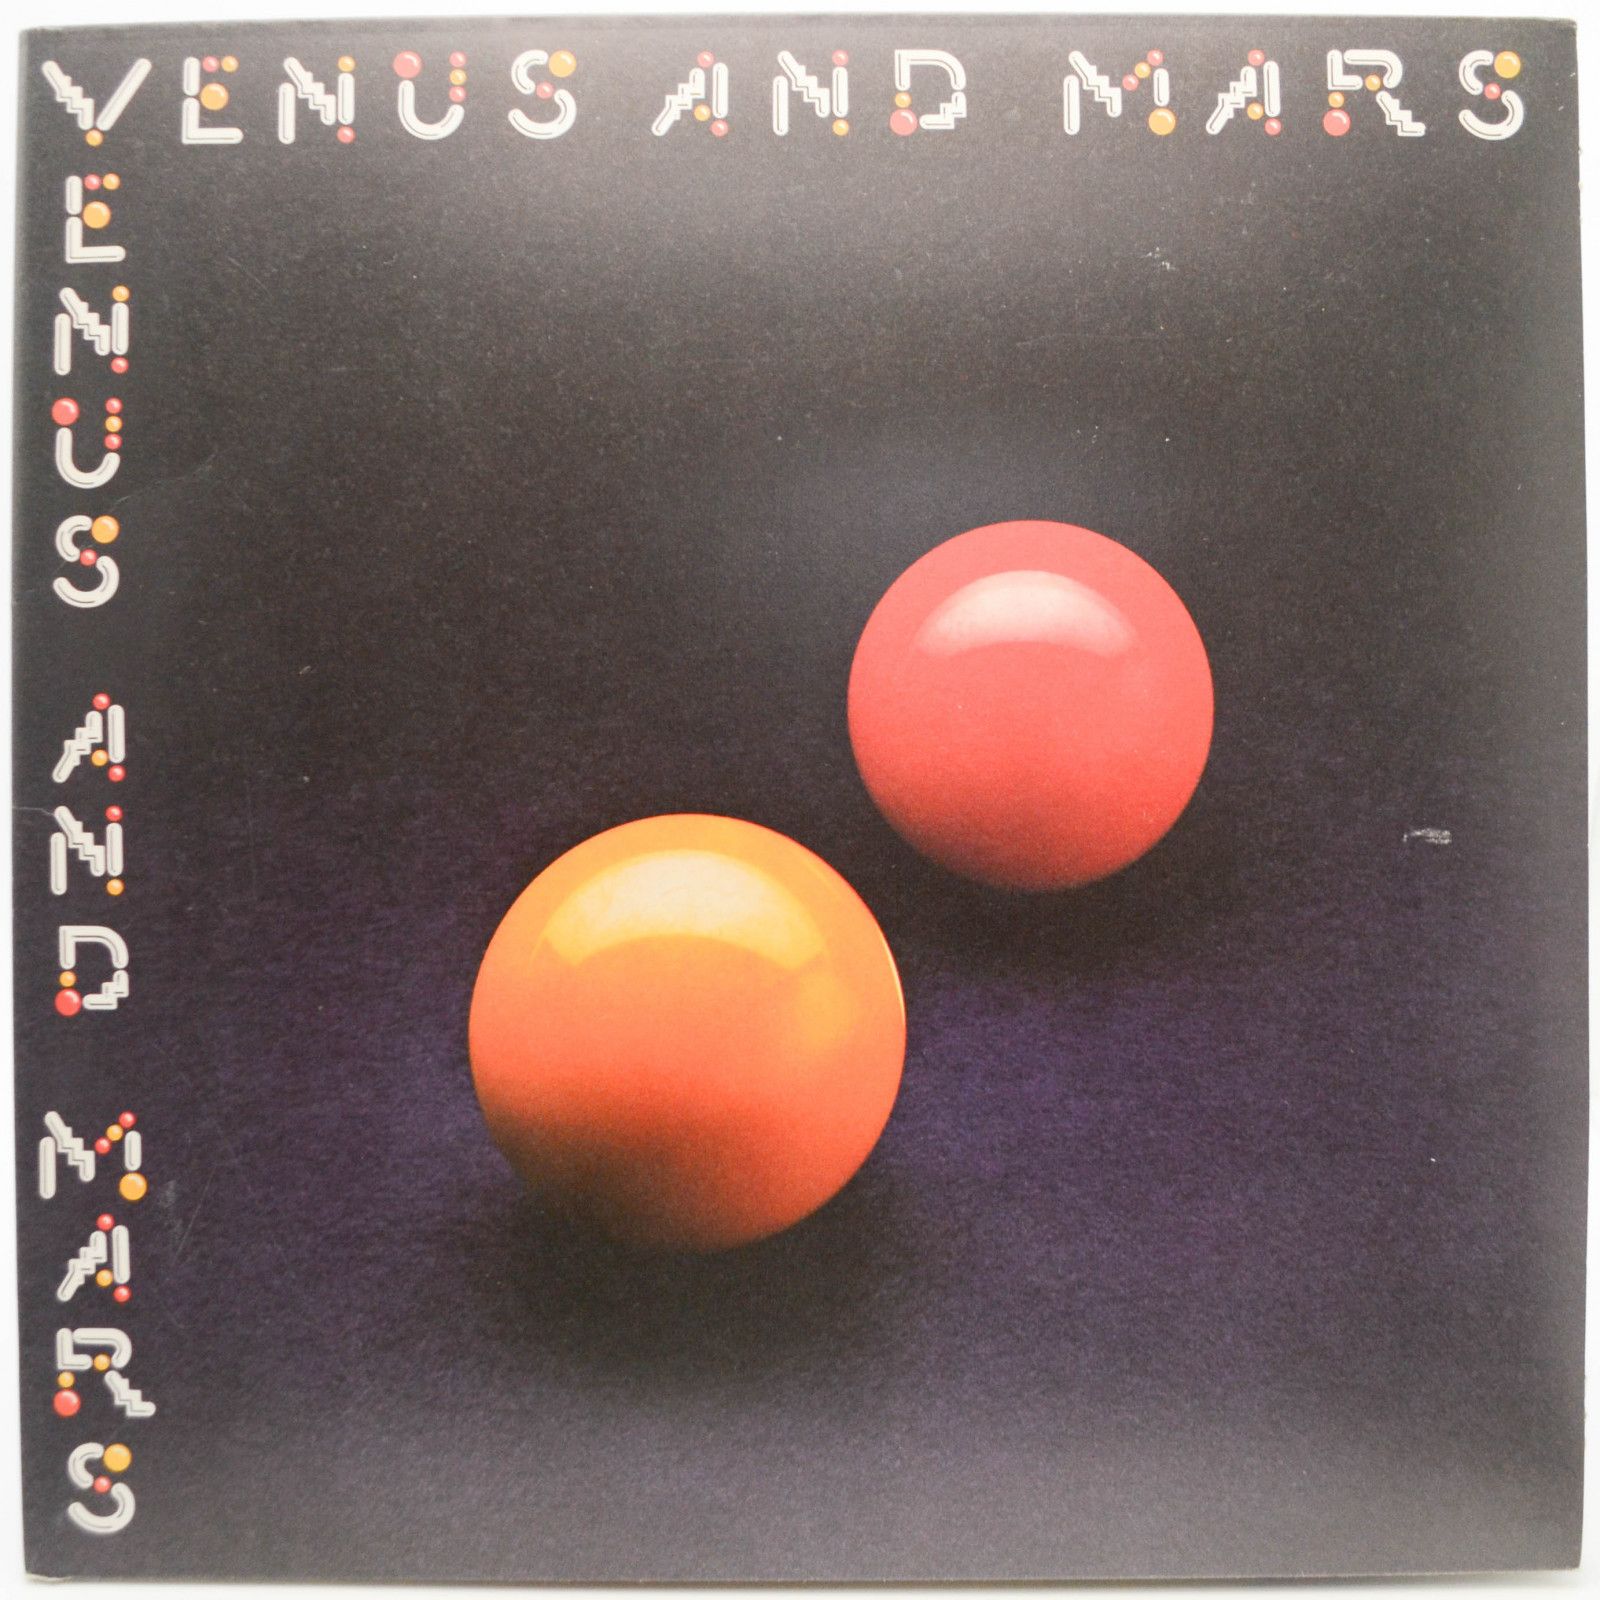 Wings — Venus And Mars (1-st, UK, 2 posters, 2 stickers), 1975